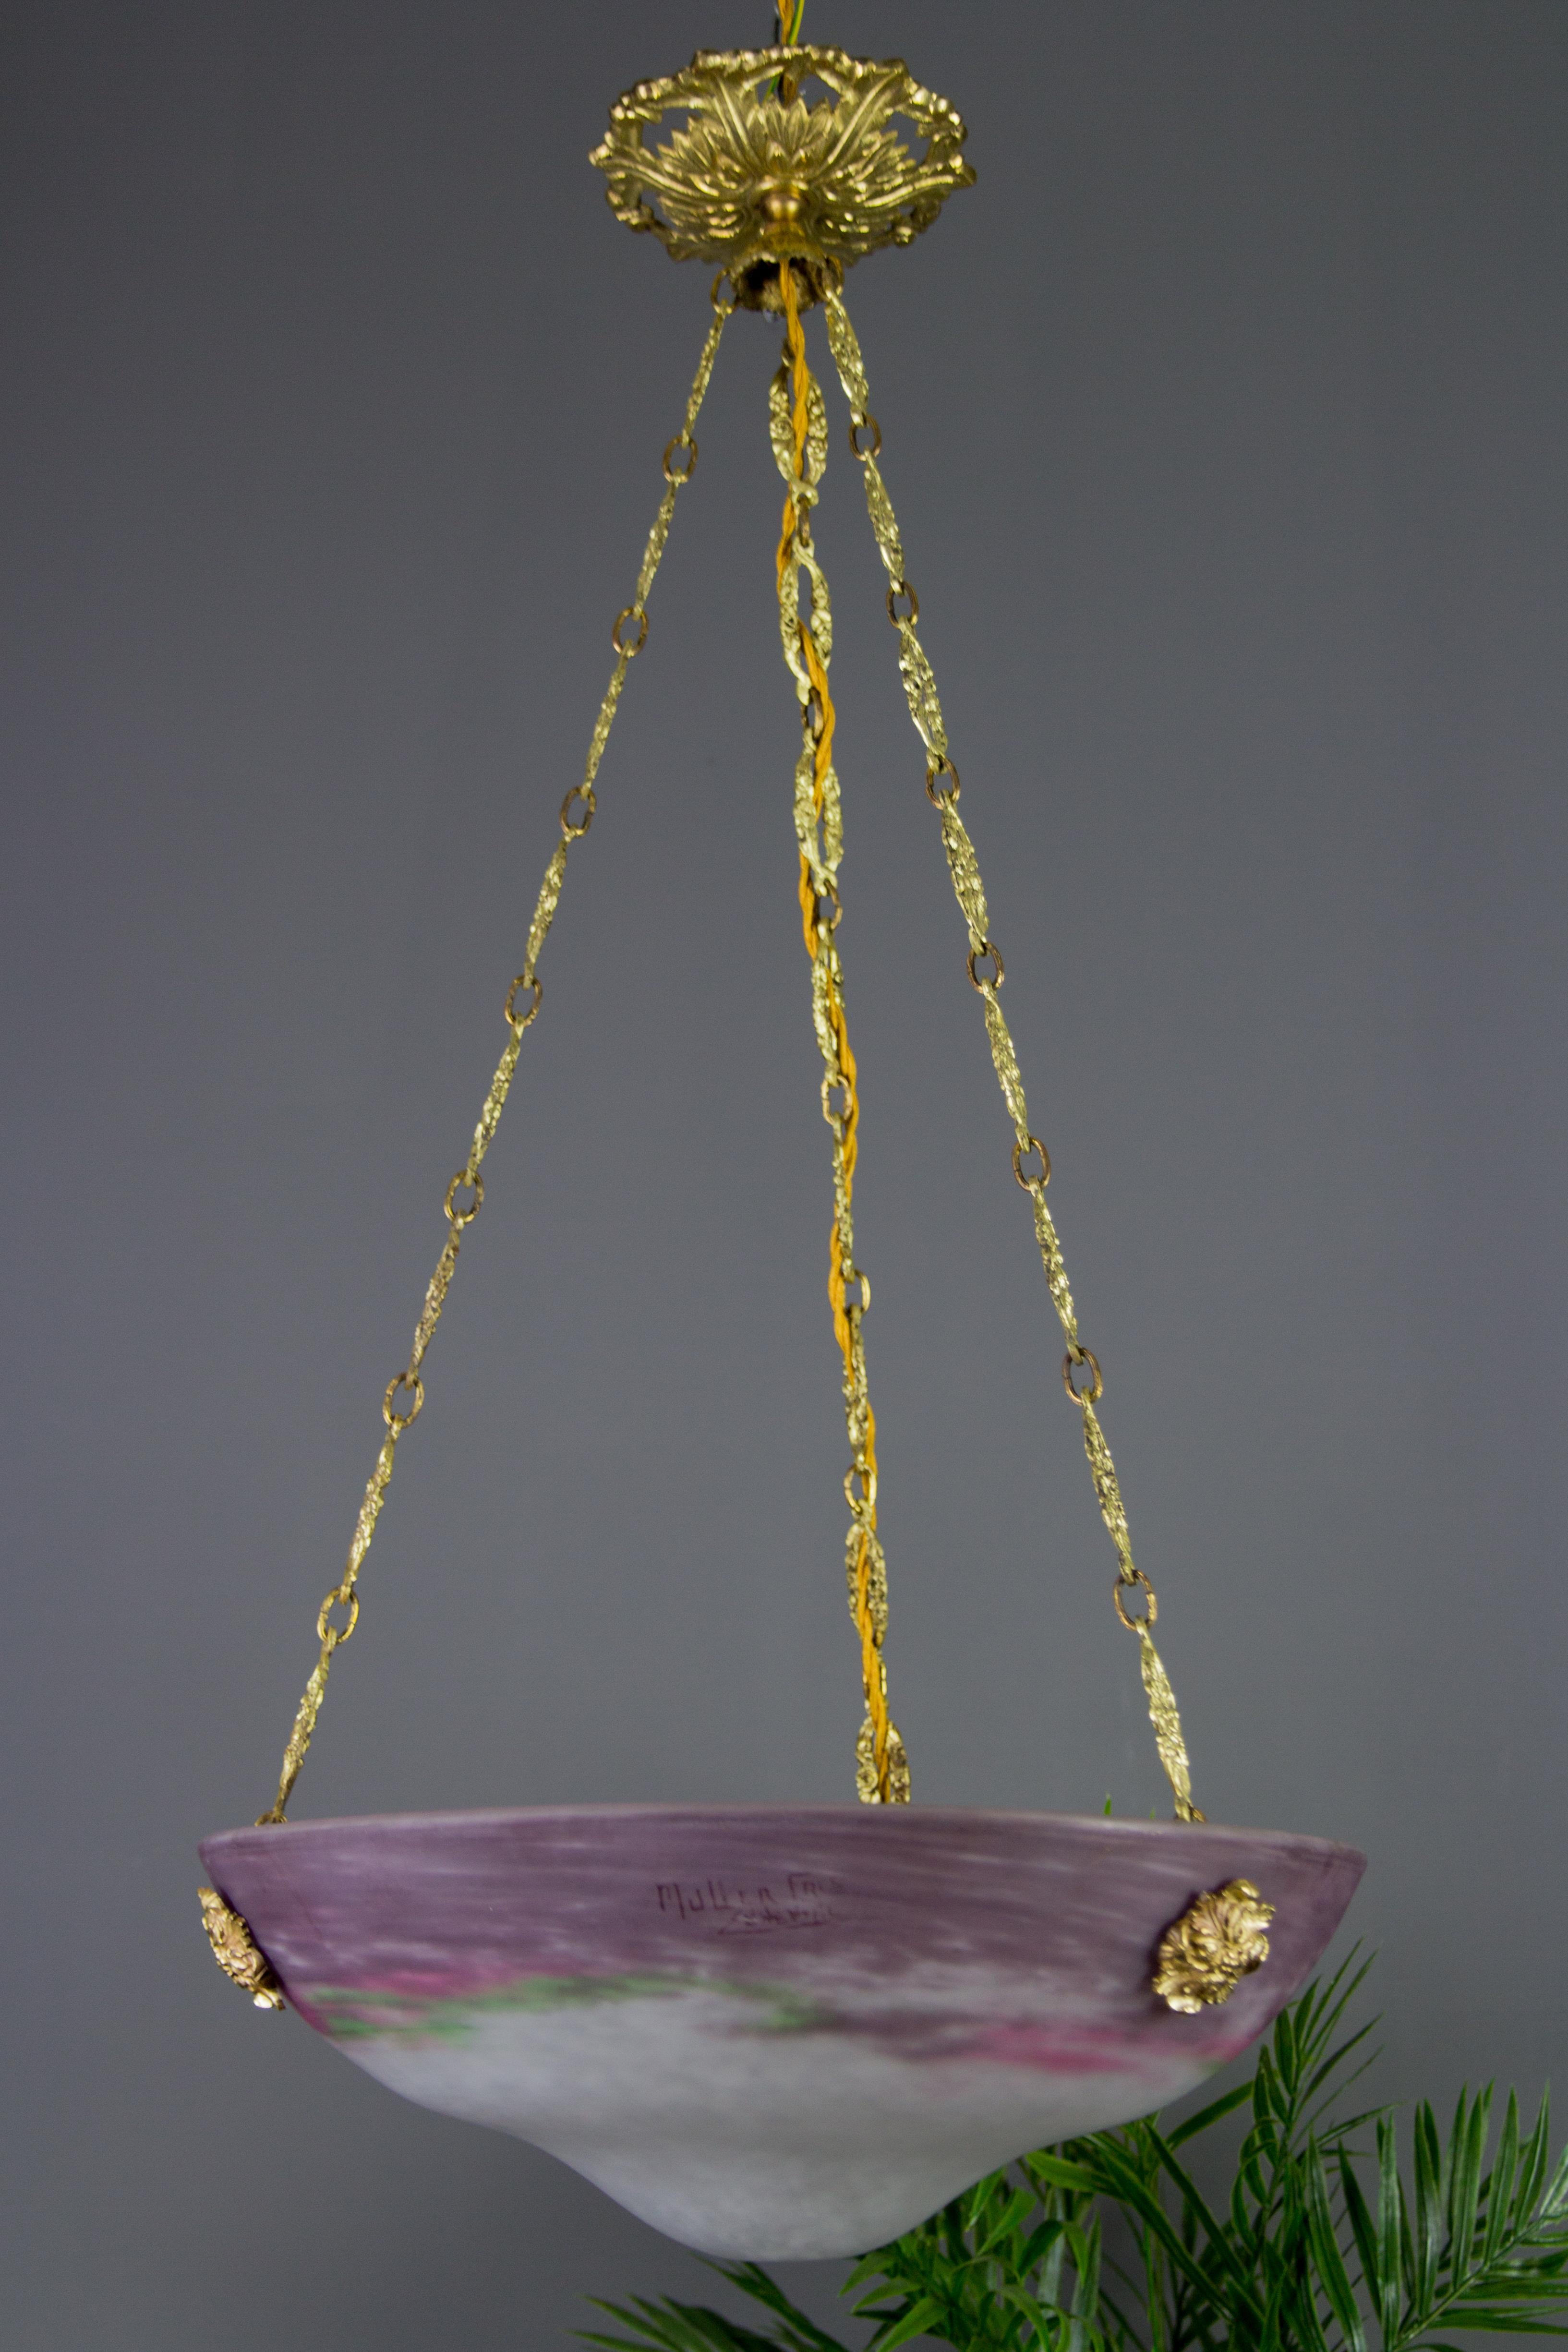 French Art Nouveau Glass Bowl Pendant Chandelier Signed by Muller Frères, 1920s For Sale 14